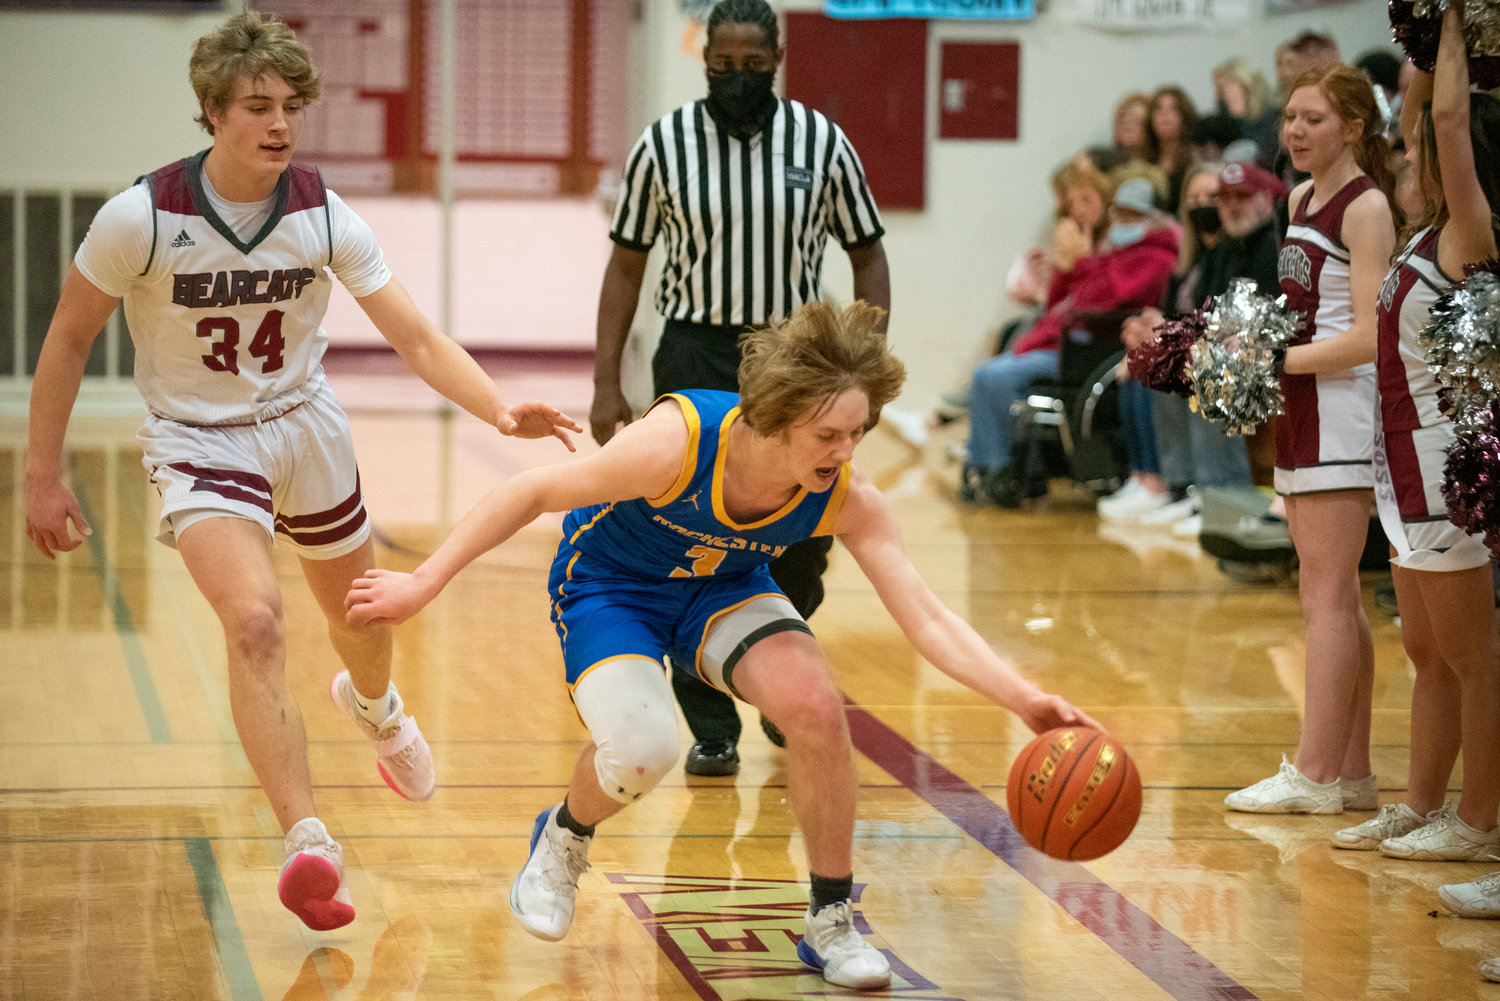 Rochester's Ben Clouse (3) hauls in a loose ball during a road game at W.F. West on Feb. 3.